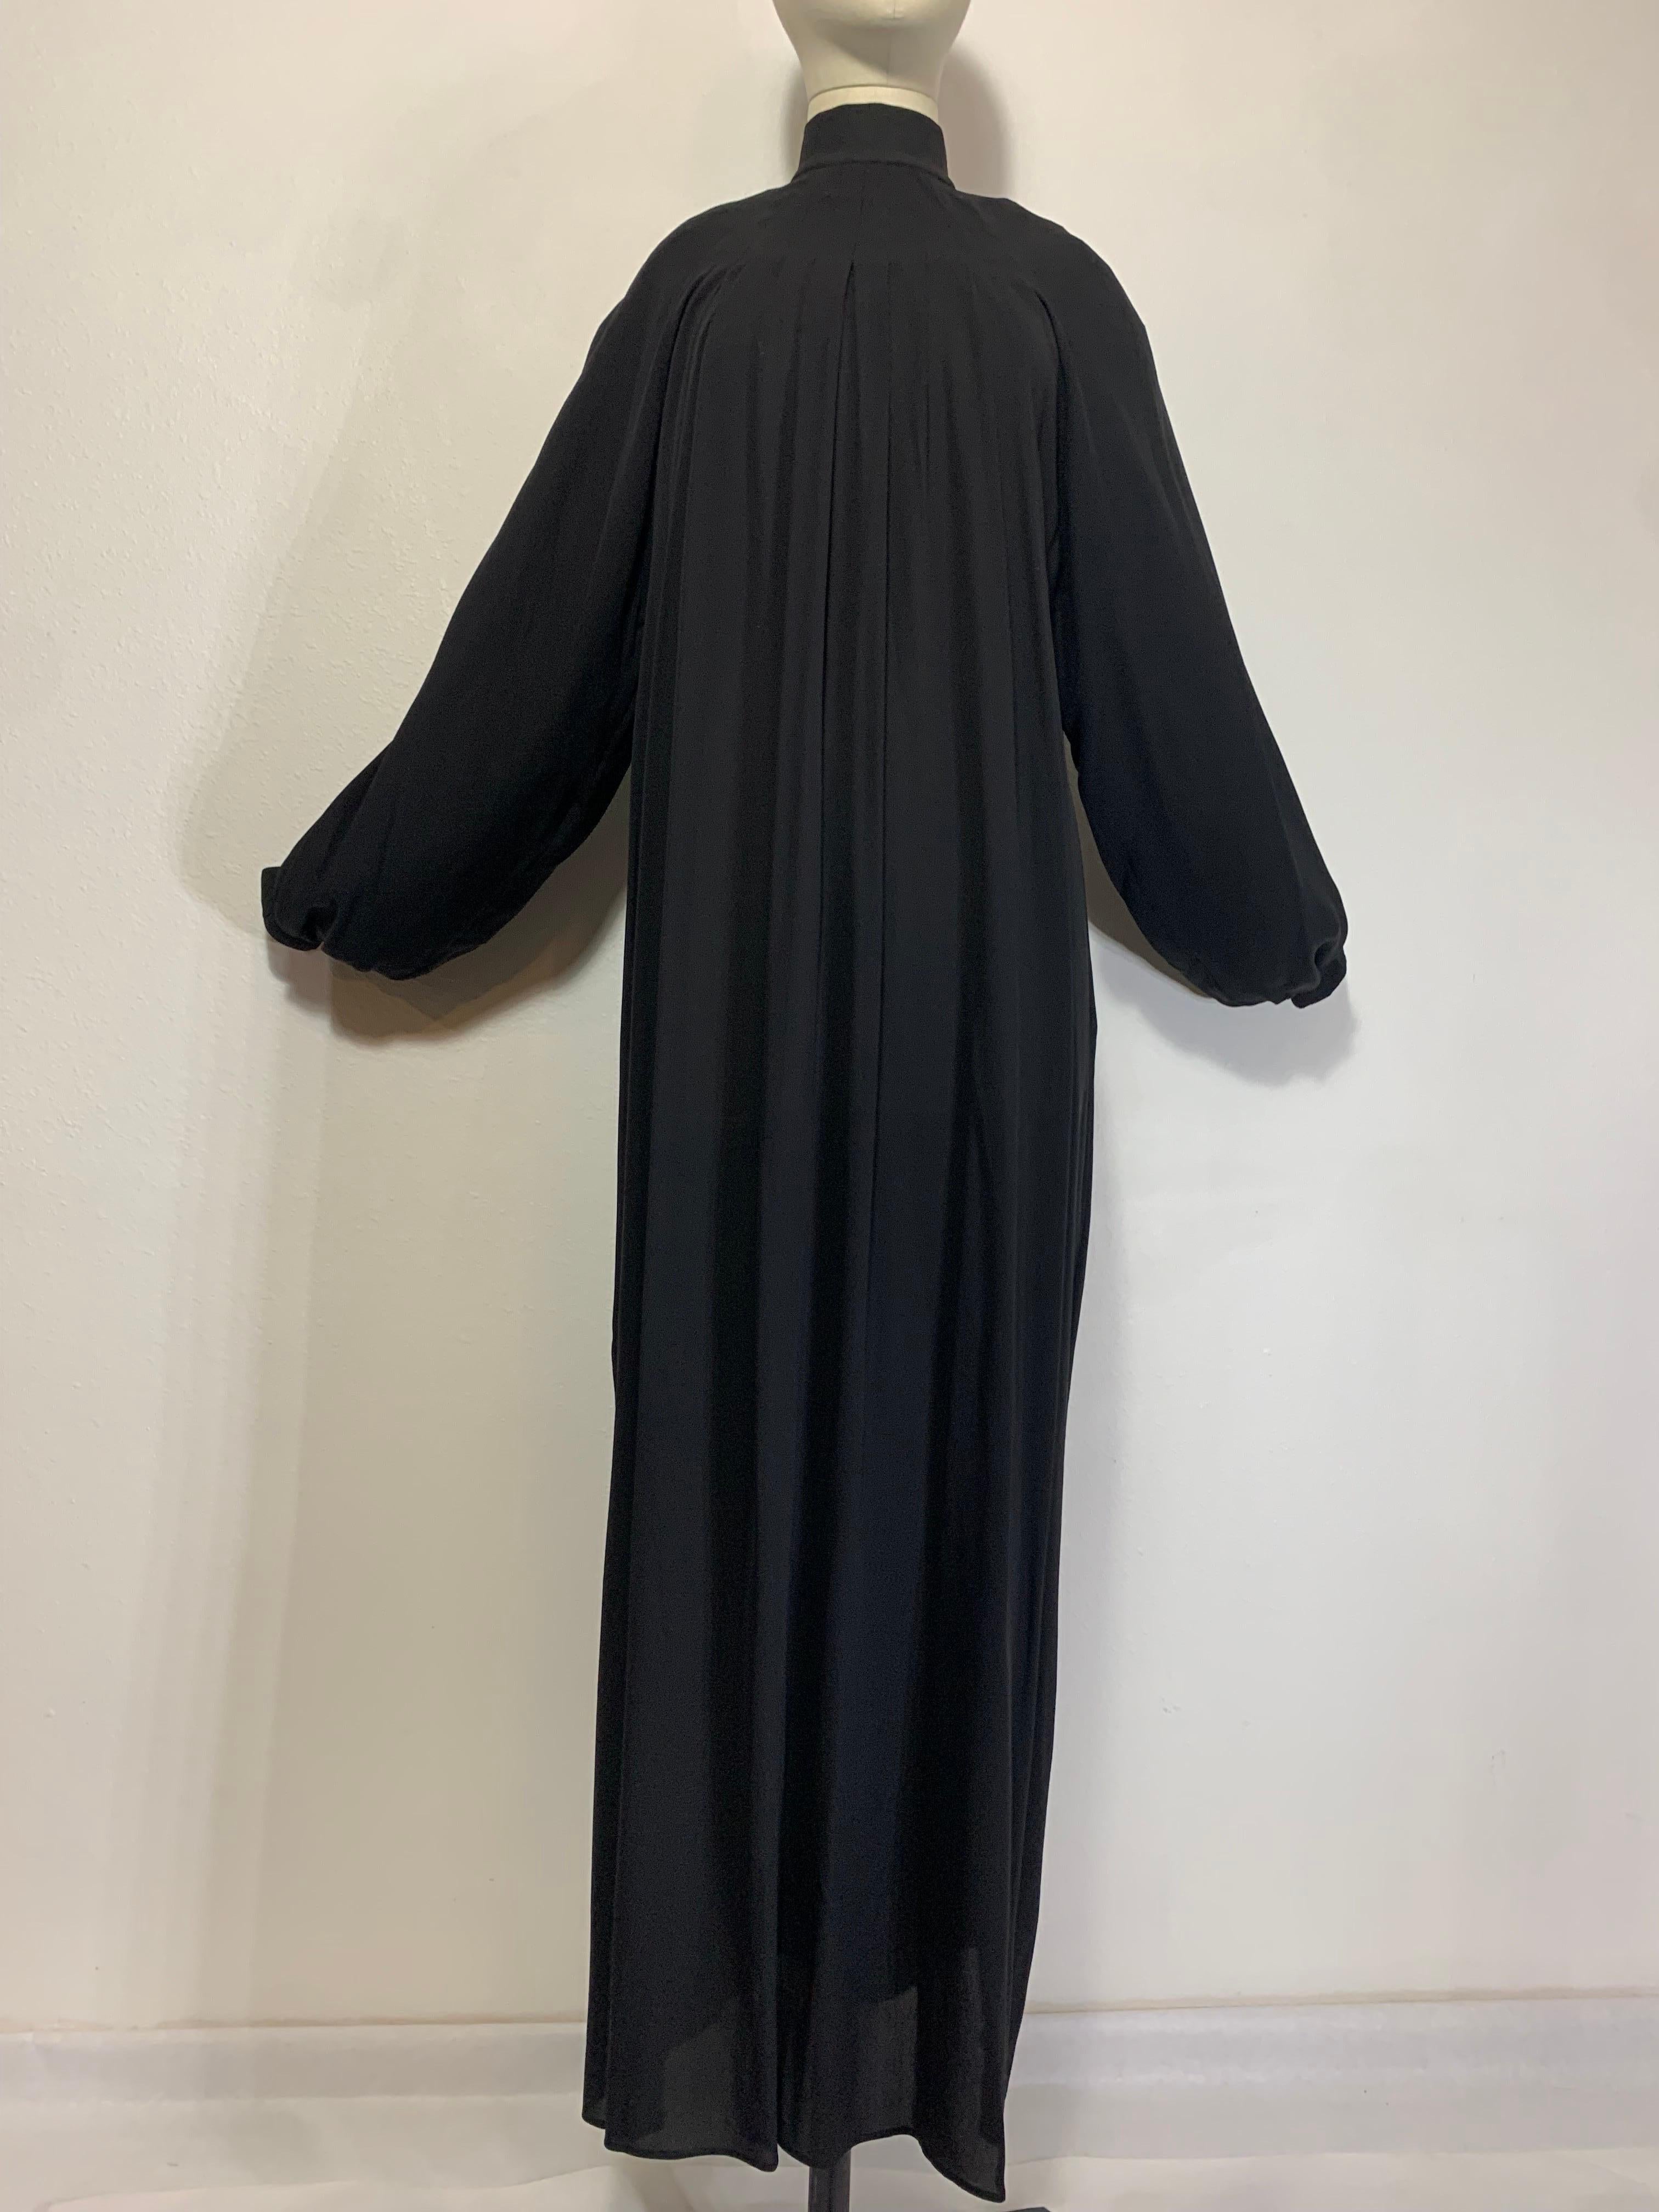 Andrew Gn Black Silk Crepe Monastic-Styled Maxi Dress w Full Pleats & High Neck:  This dramatic silhouette is striking in its simplicity with full body pleating from shoulder yolk and a high mock turtleneck collar. Full banded and gathered snap-cuff